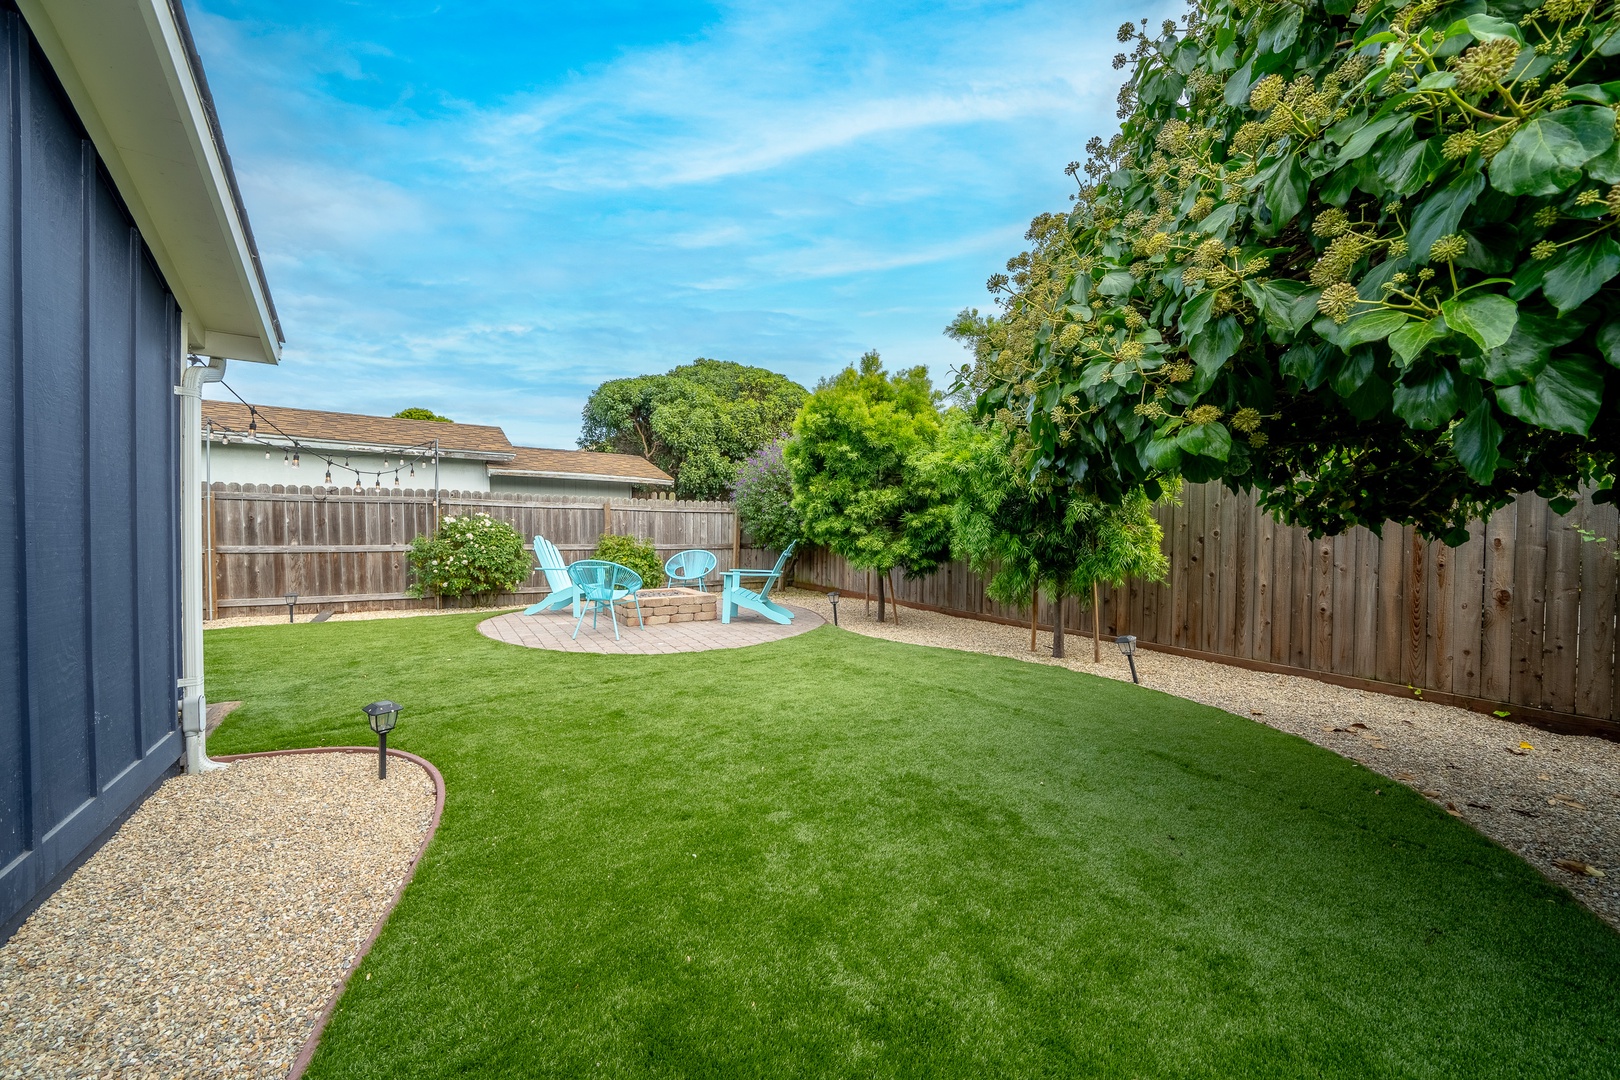 The spacious, enclosed back yard offers ample space for relaxation & play